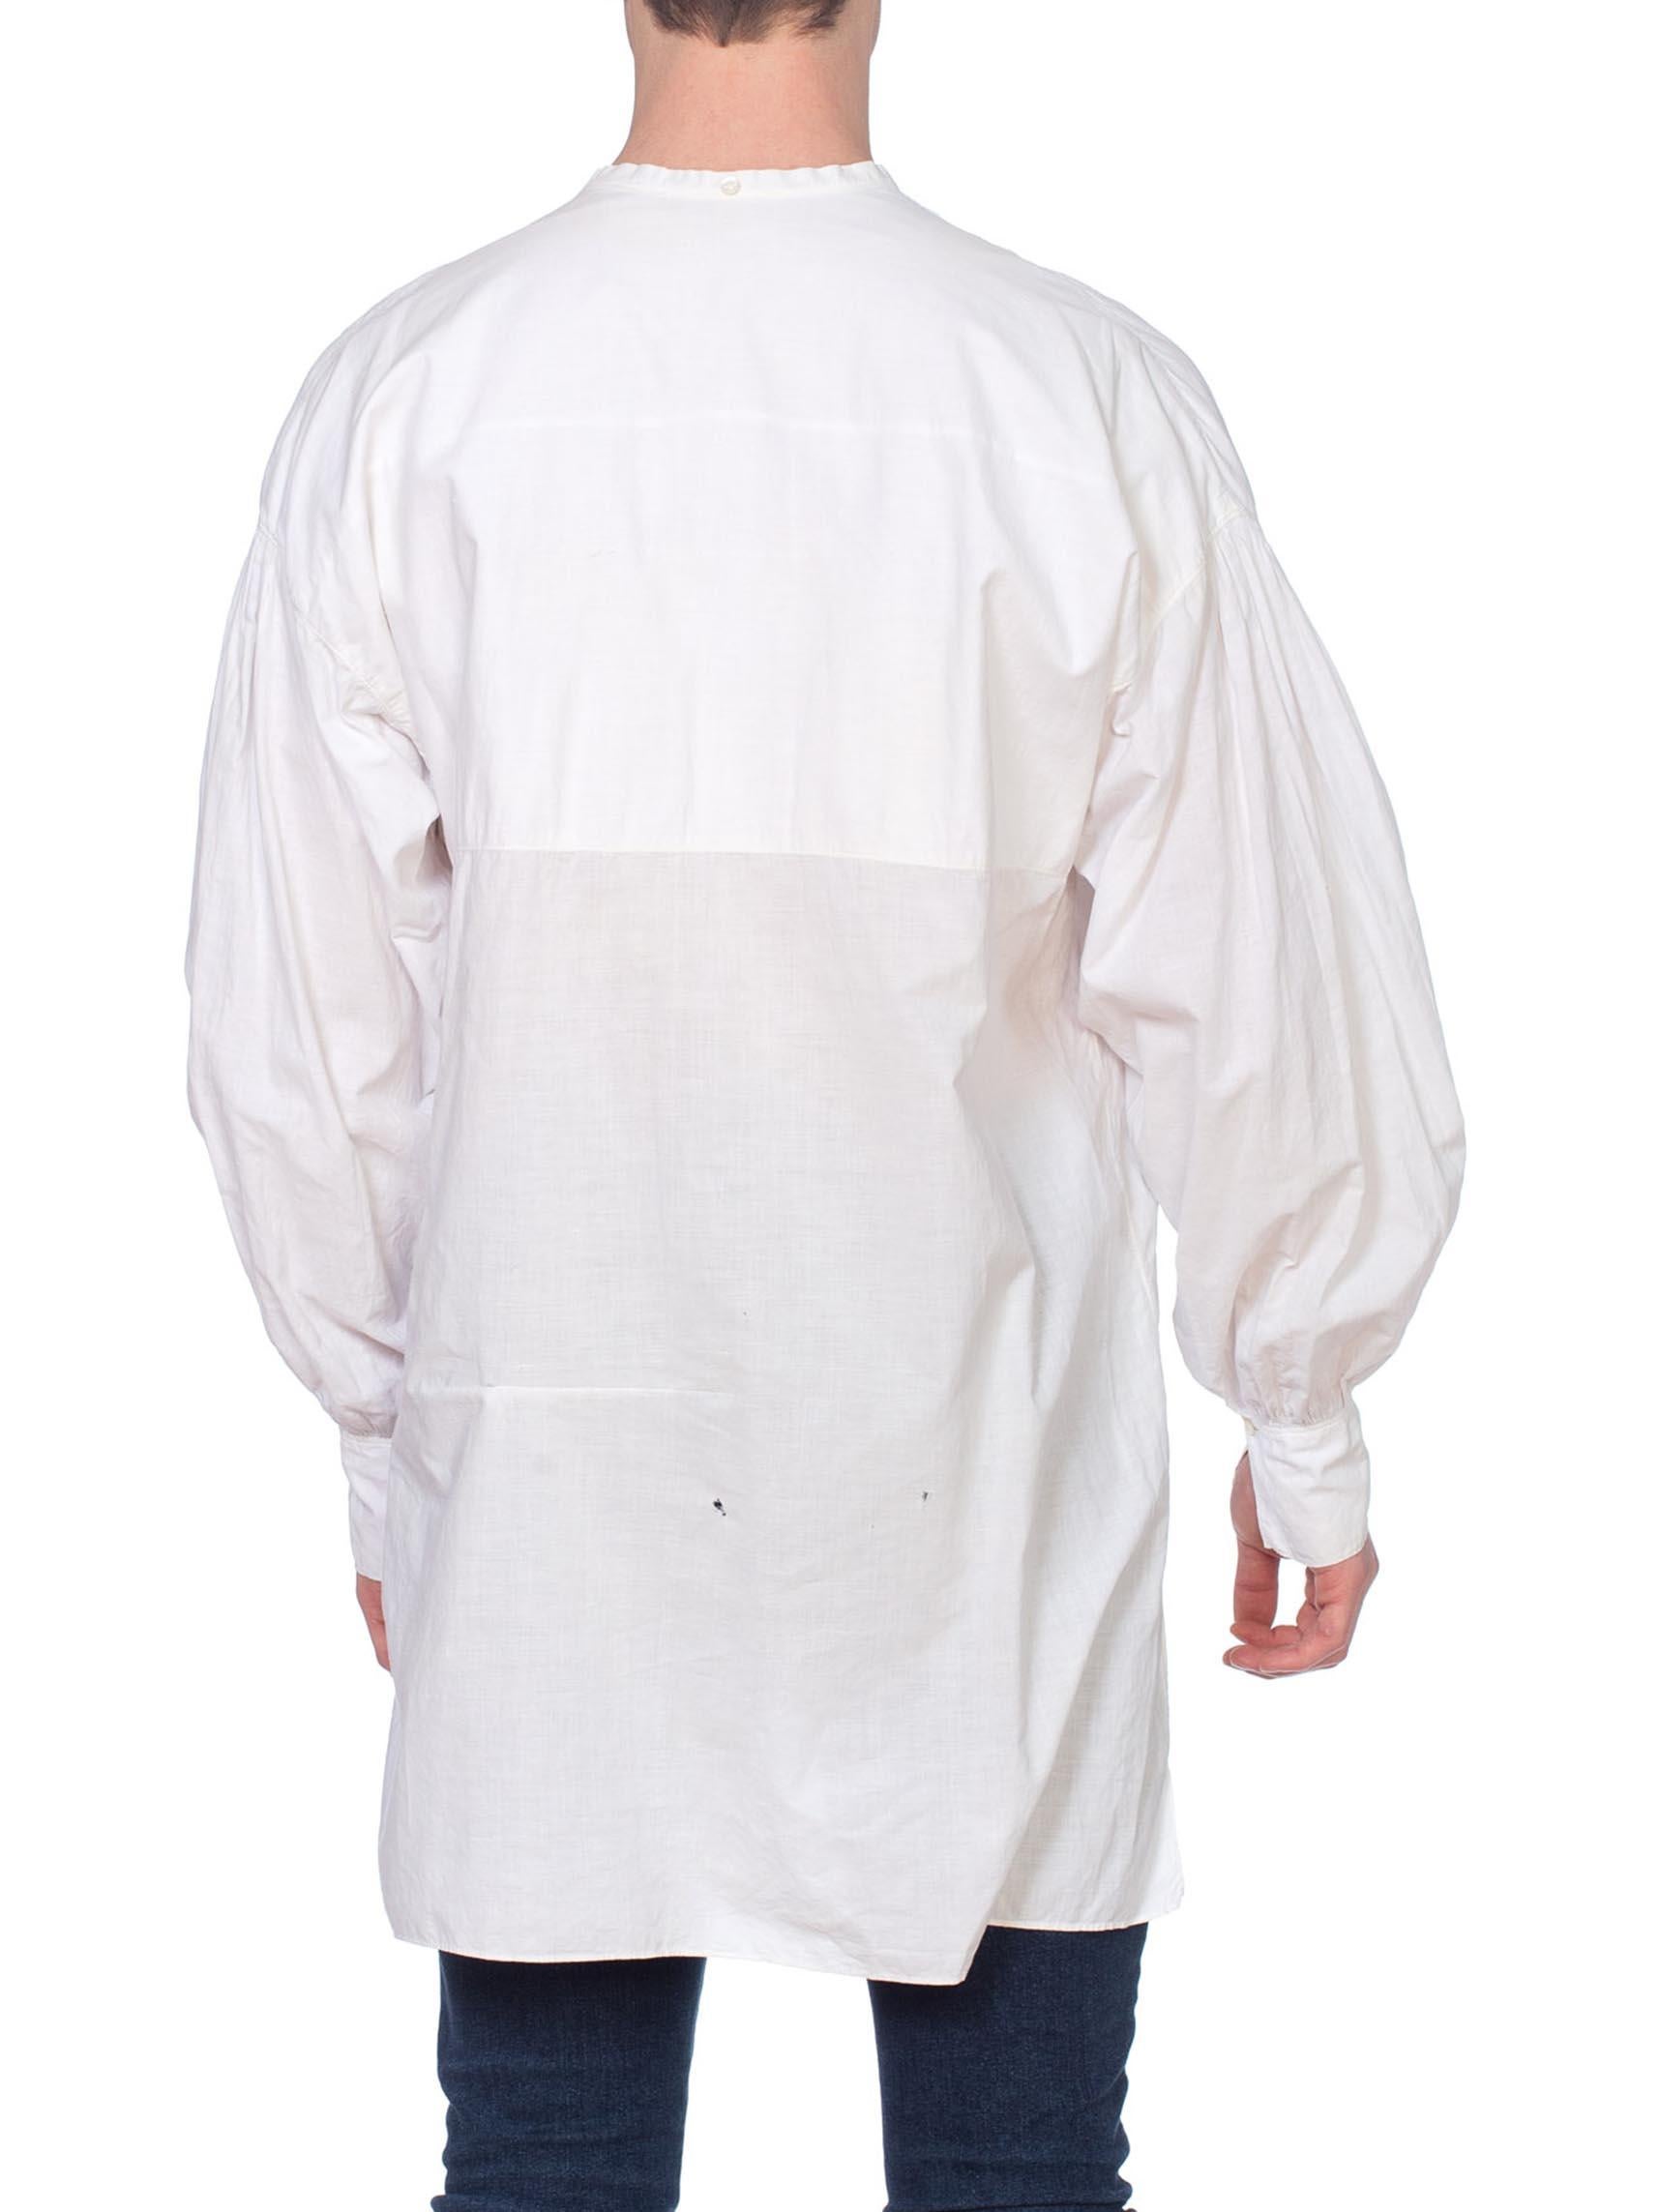 Gray Victorian White Organic Cotton Men's 1850'S Or Earlier Hand Embroidered Shirt